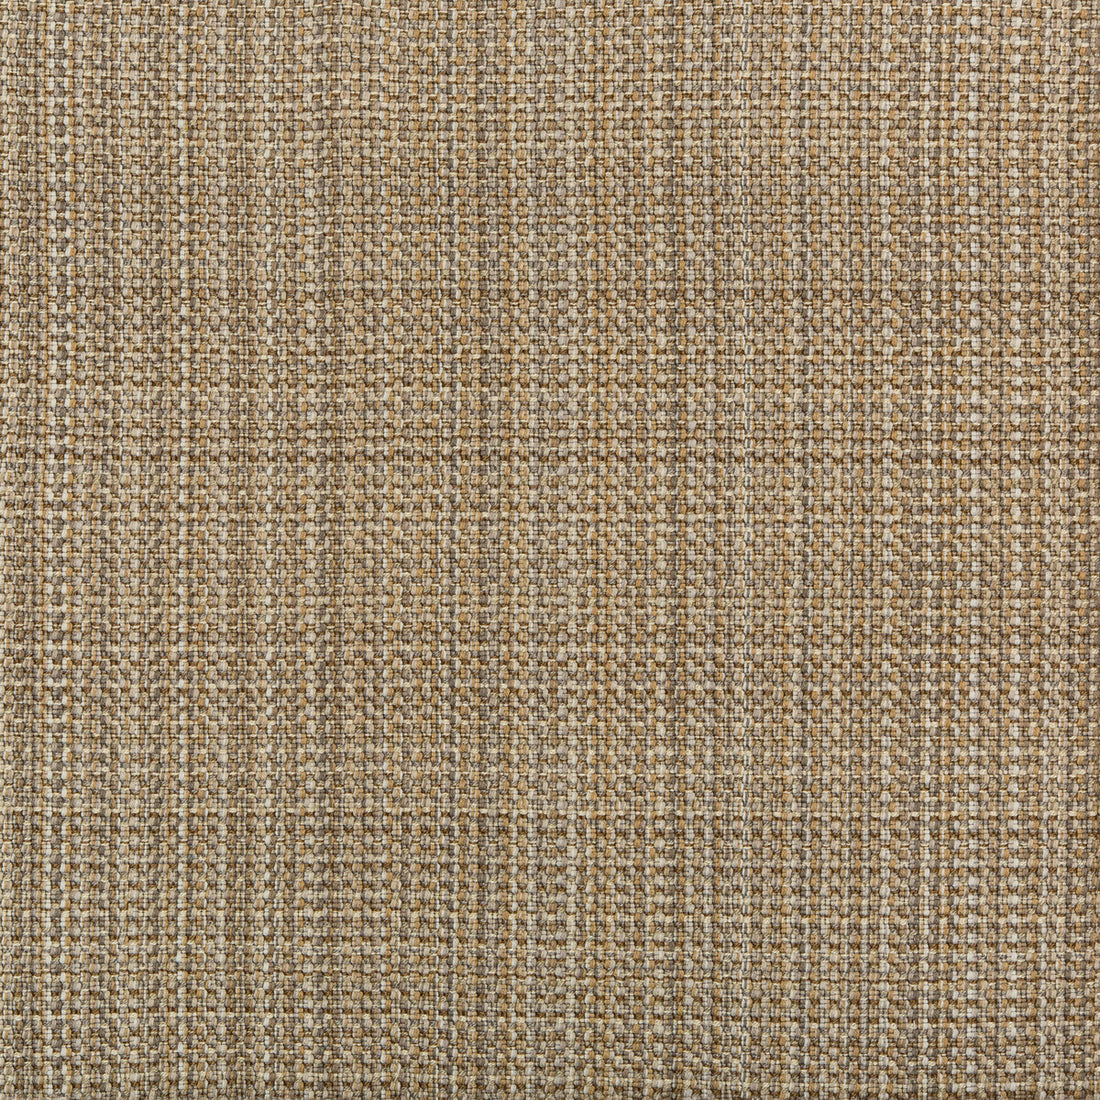 Tailor Made fabric in sand color - pattern 34932.16.0 - by Kravet Couture in the Modern Tailor collection